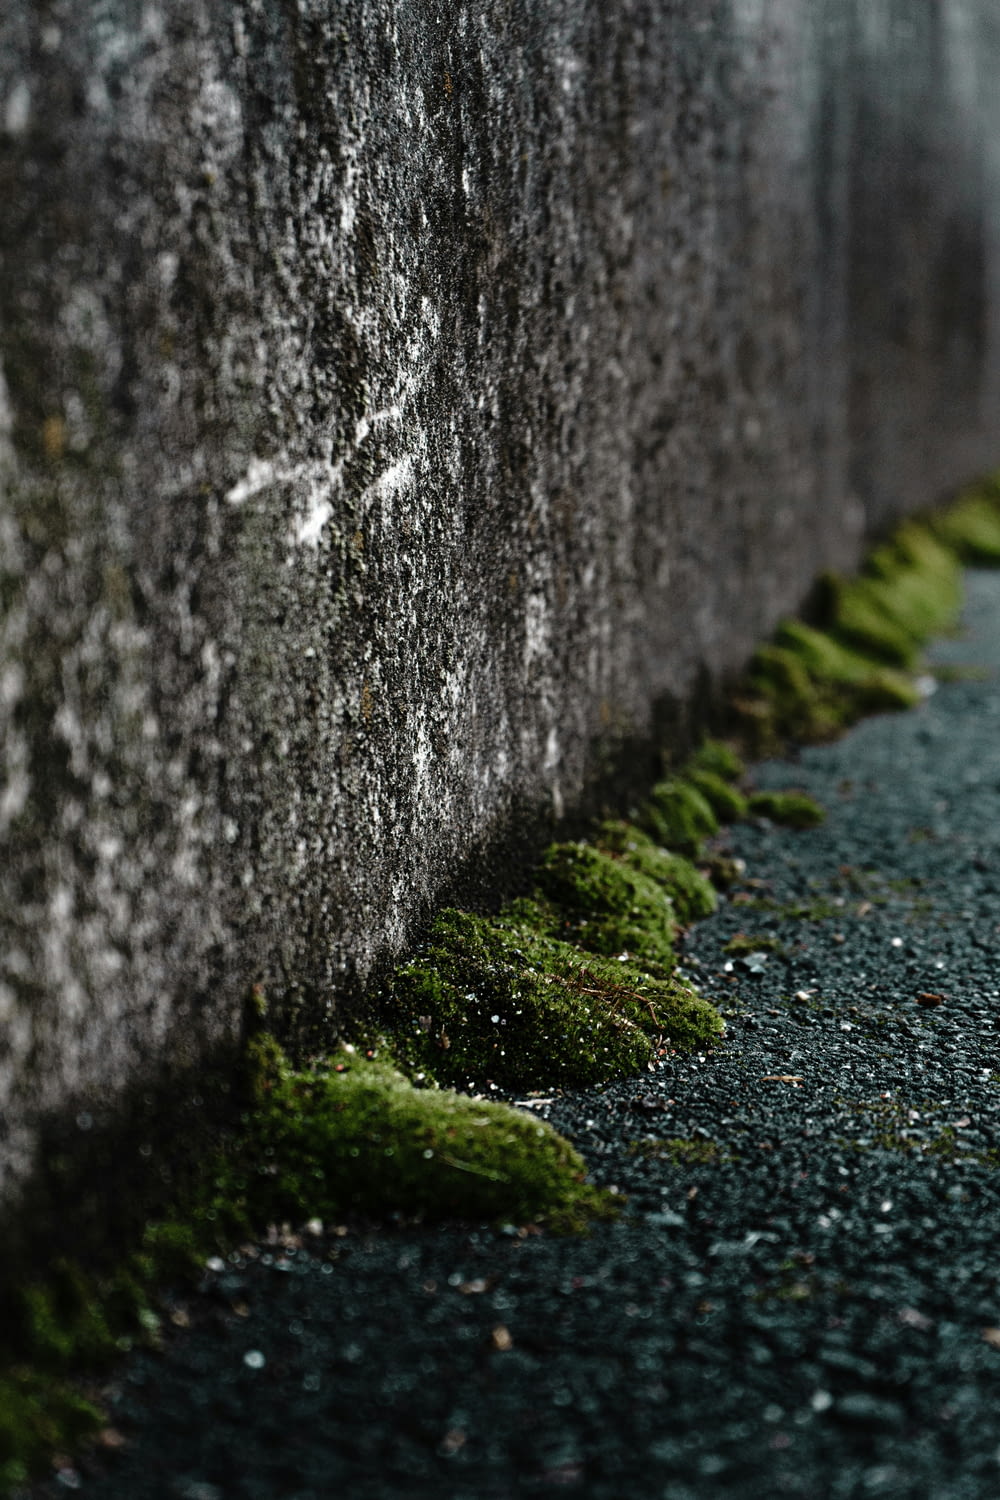 moss growing on the side of a concrete wall